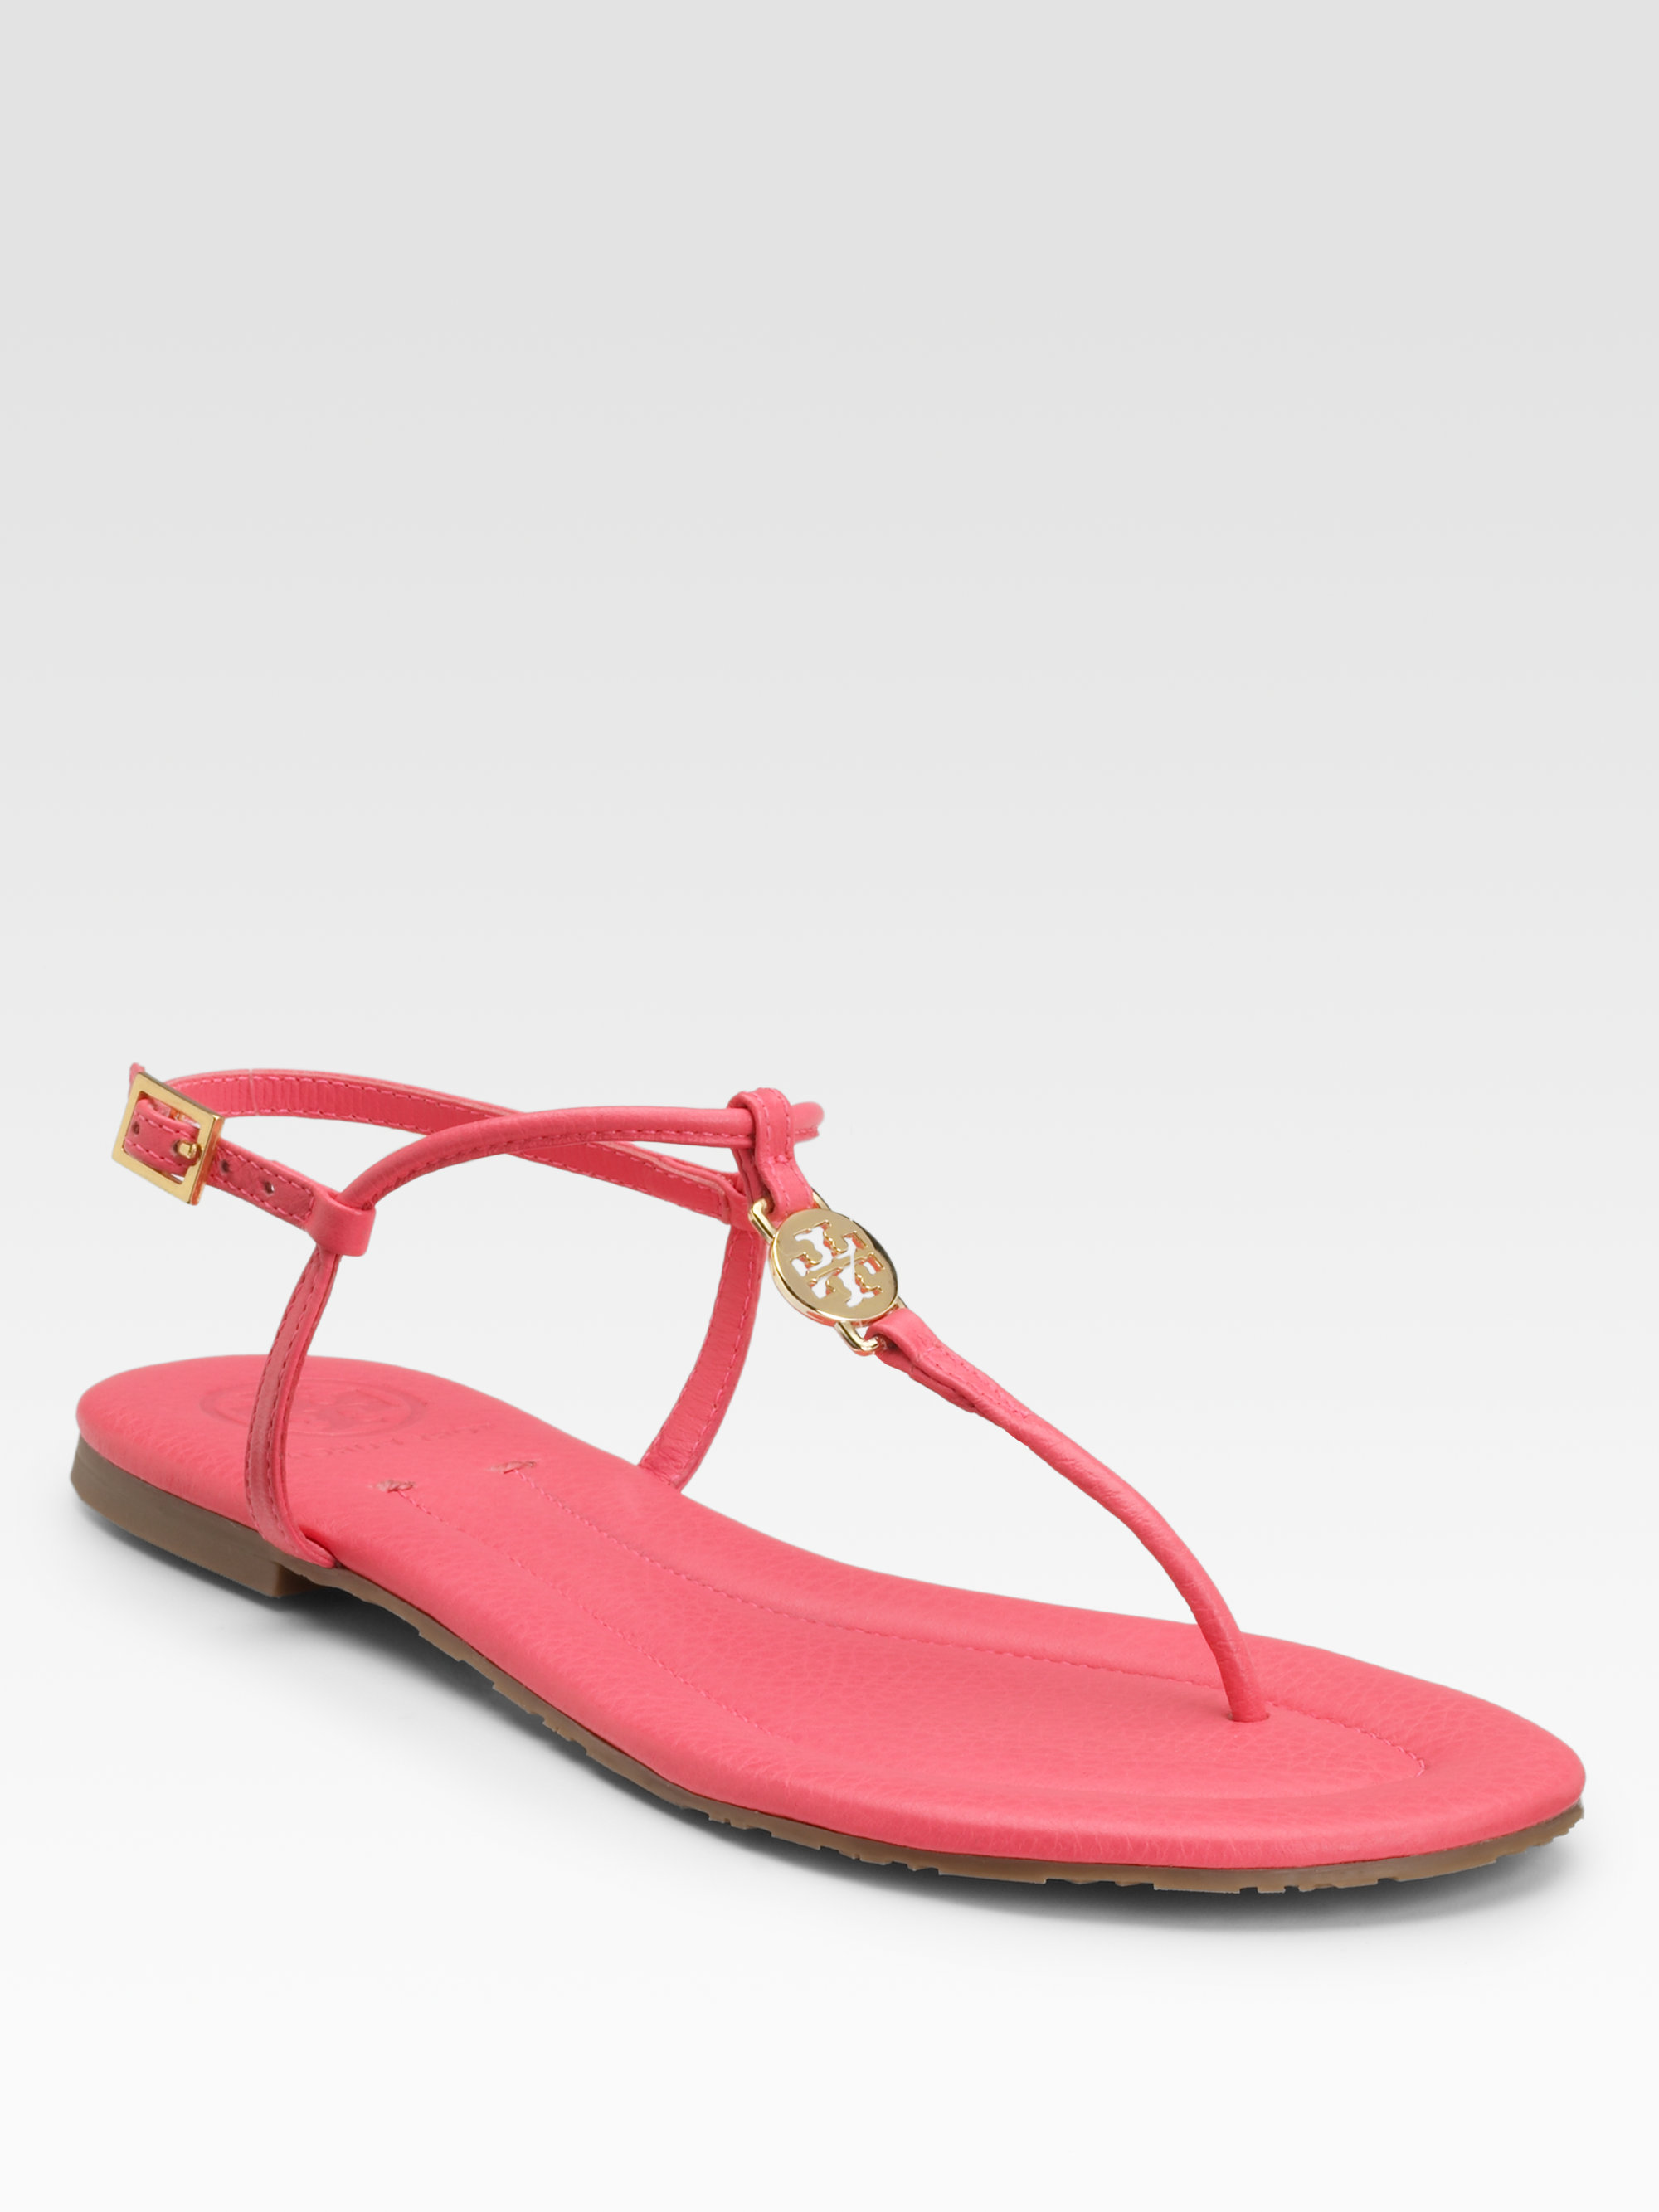 Tory Burch Emmy Thong Sandals in Turquoise (Pink) - Lyst